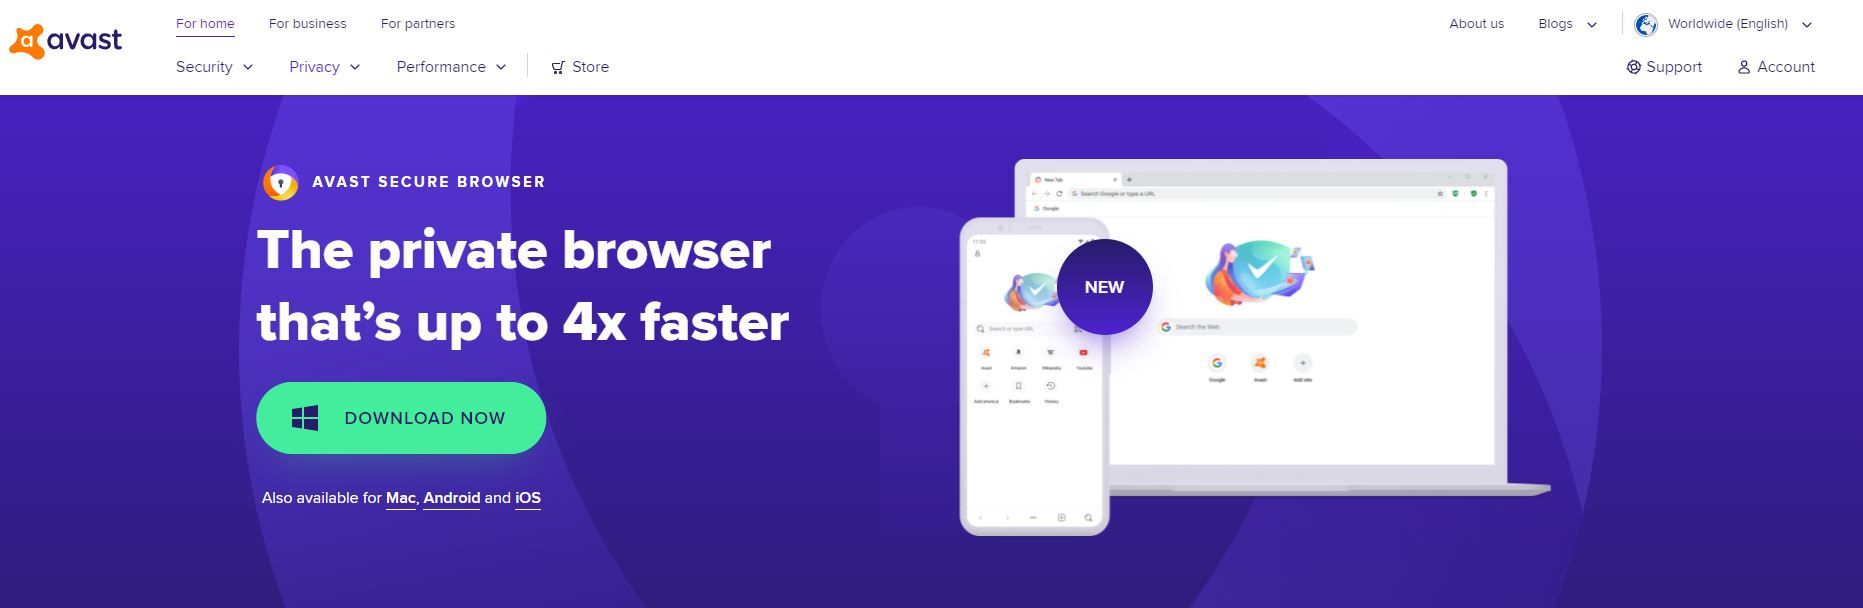 Avast Secure Browser home